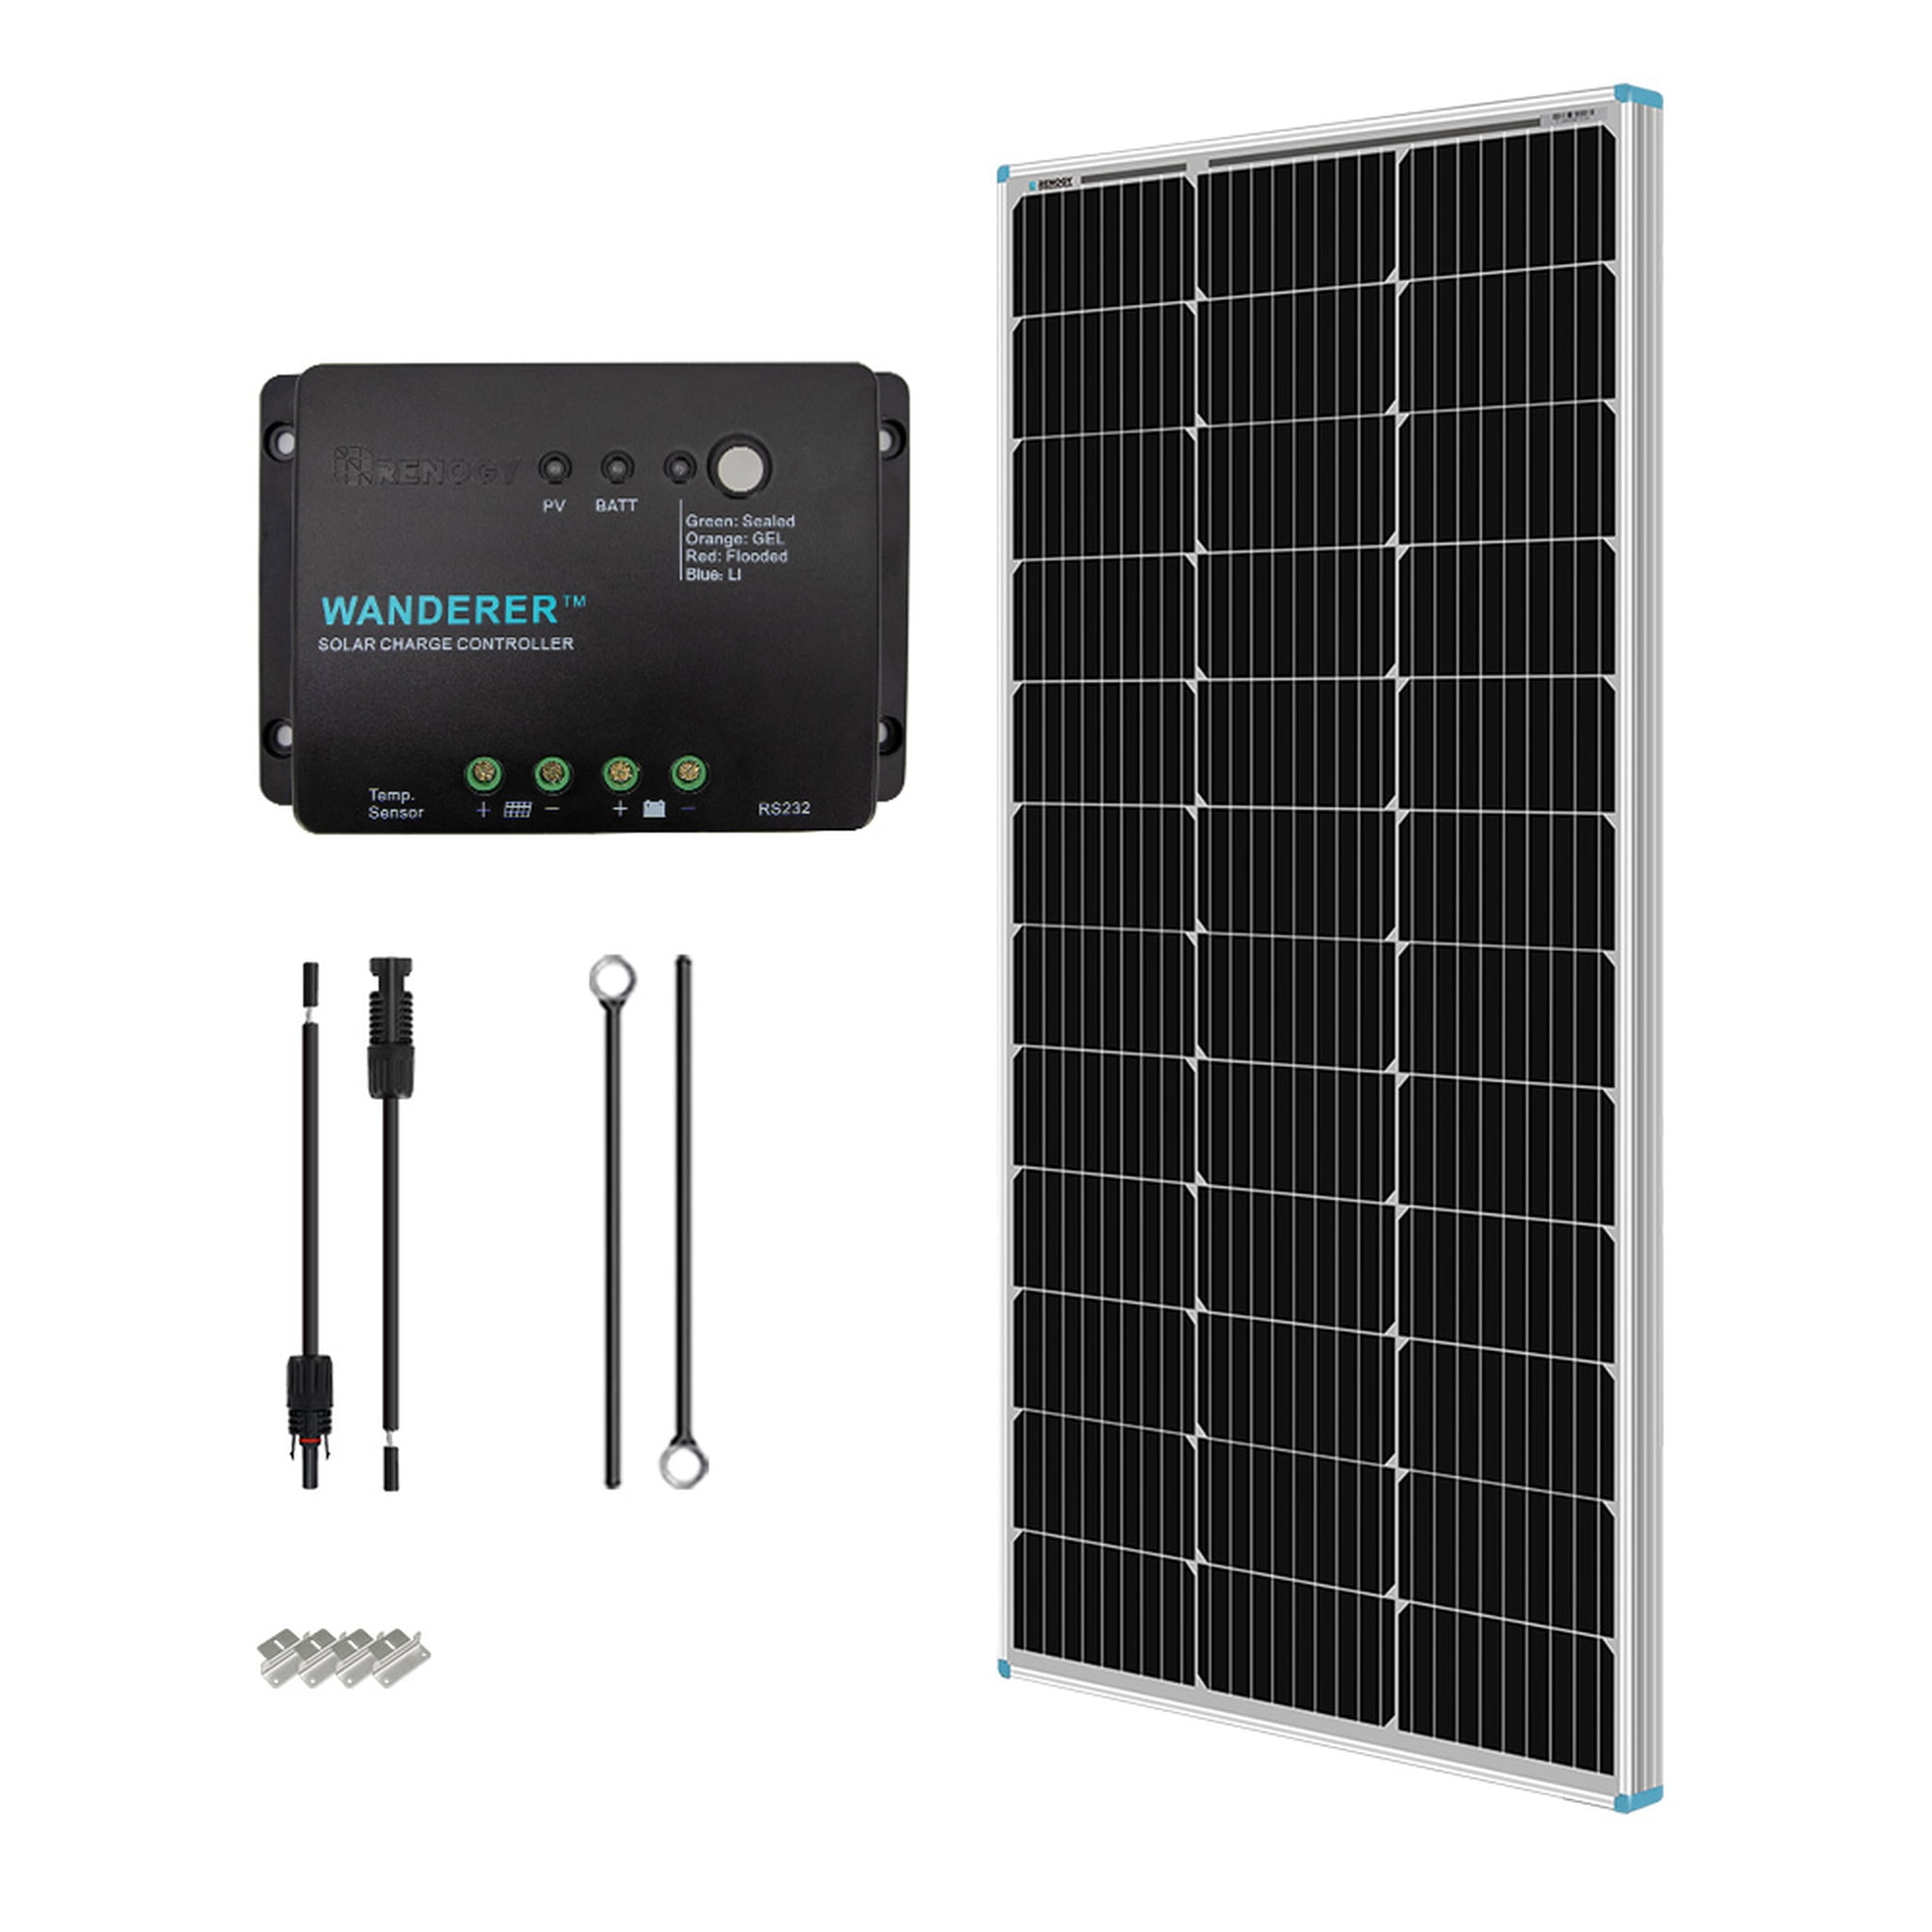 Upgraded] 30A Solar Charge Controller, Black Solar Panel Battery